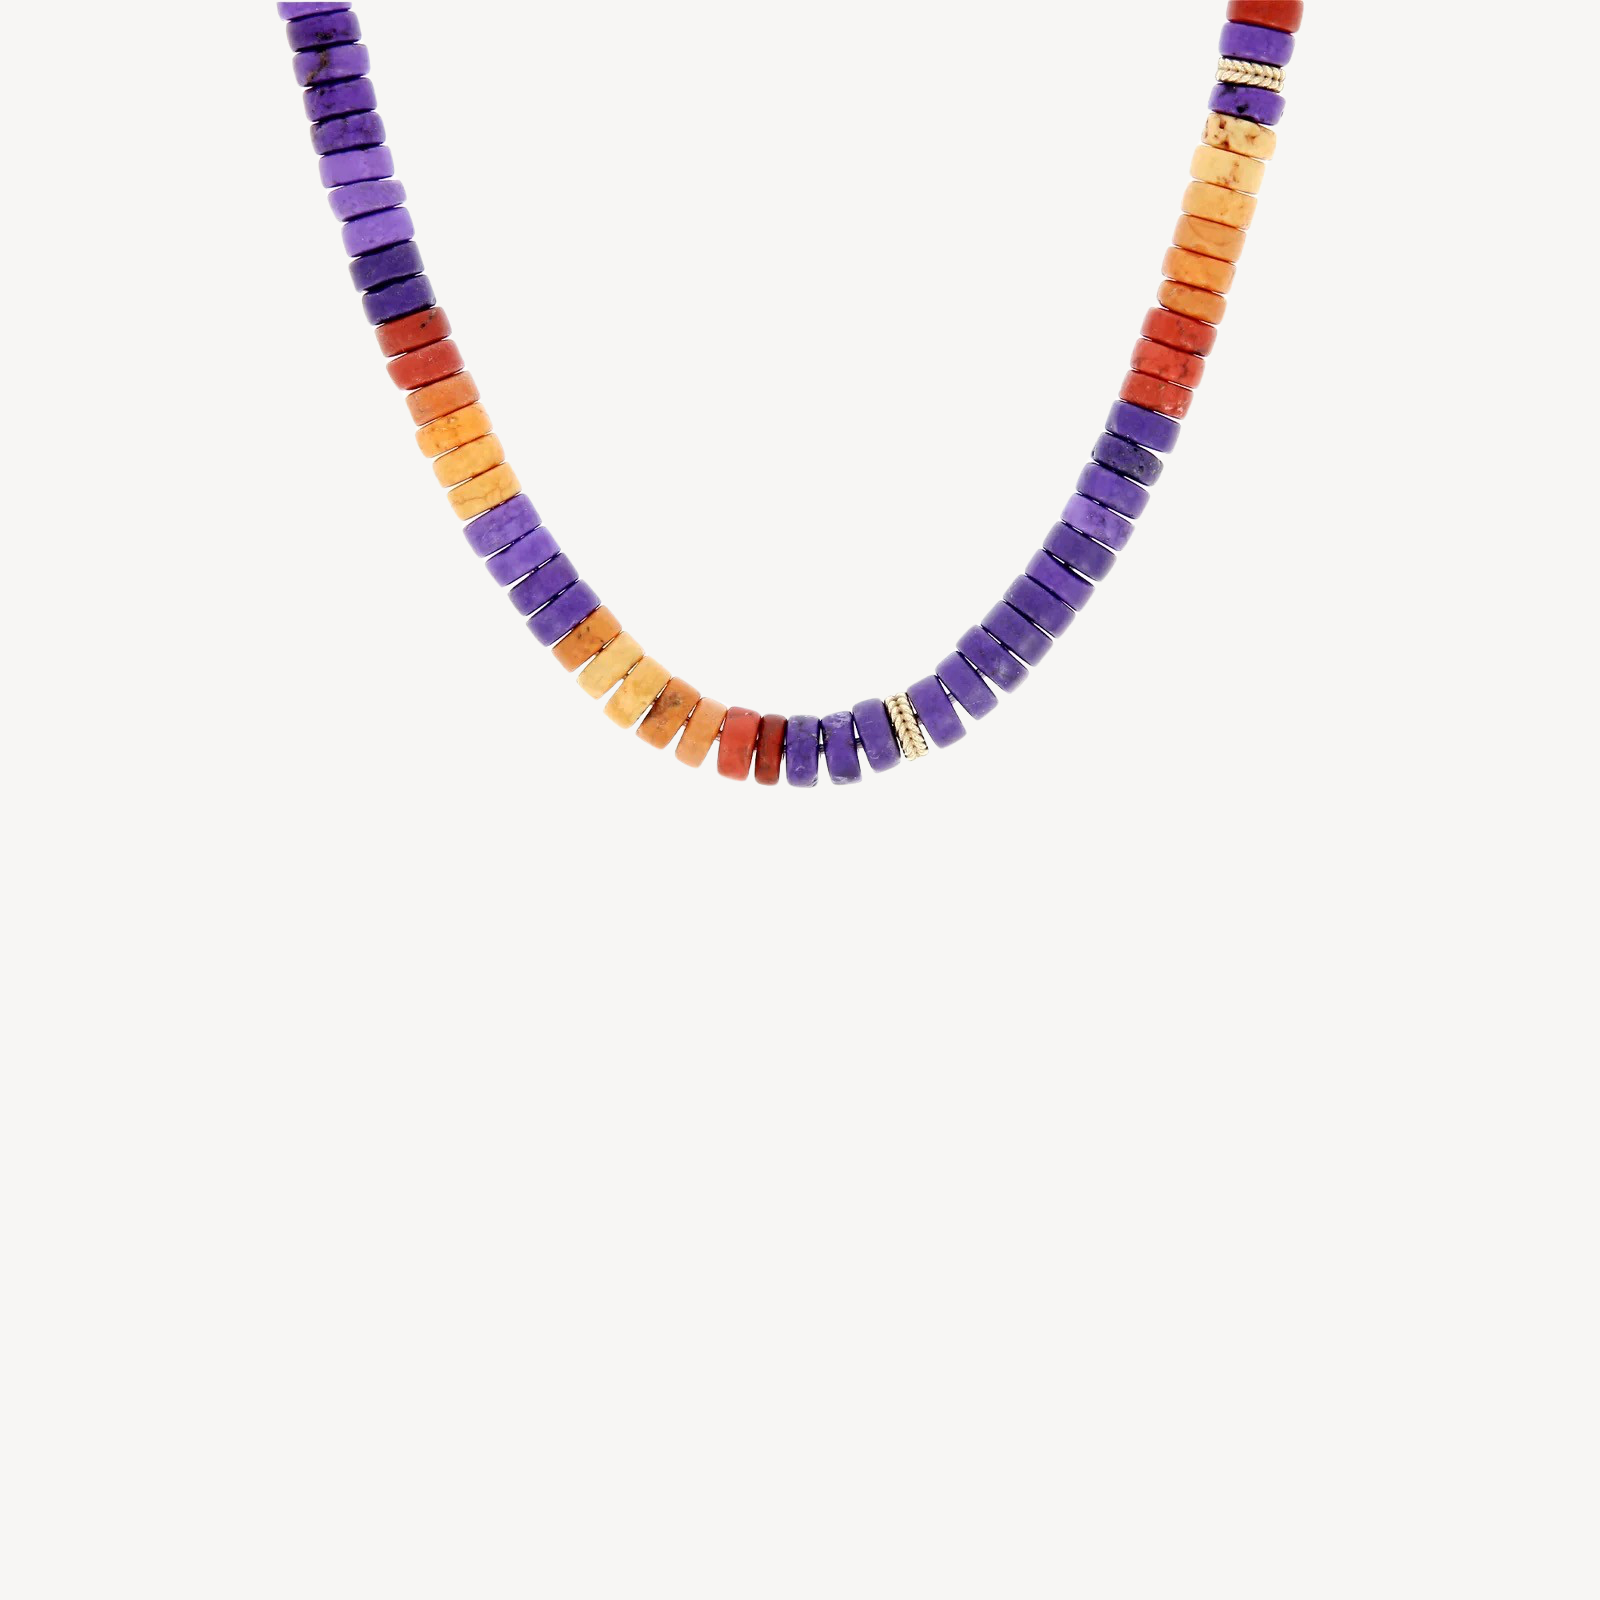 Purple, Red and Orange Beads Necklace